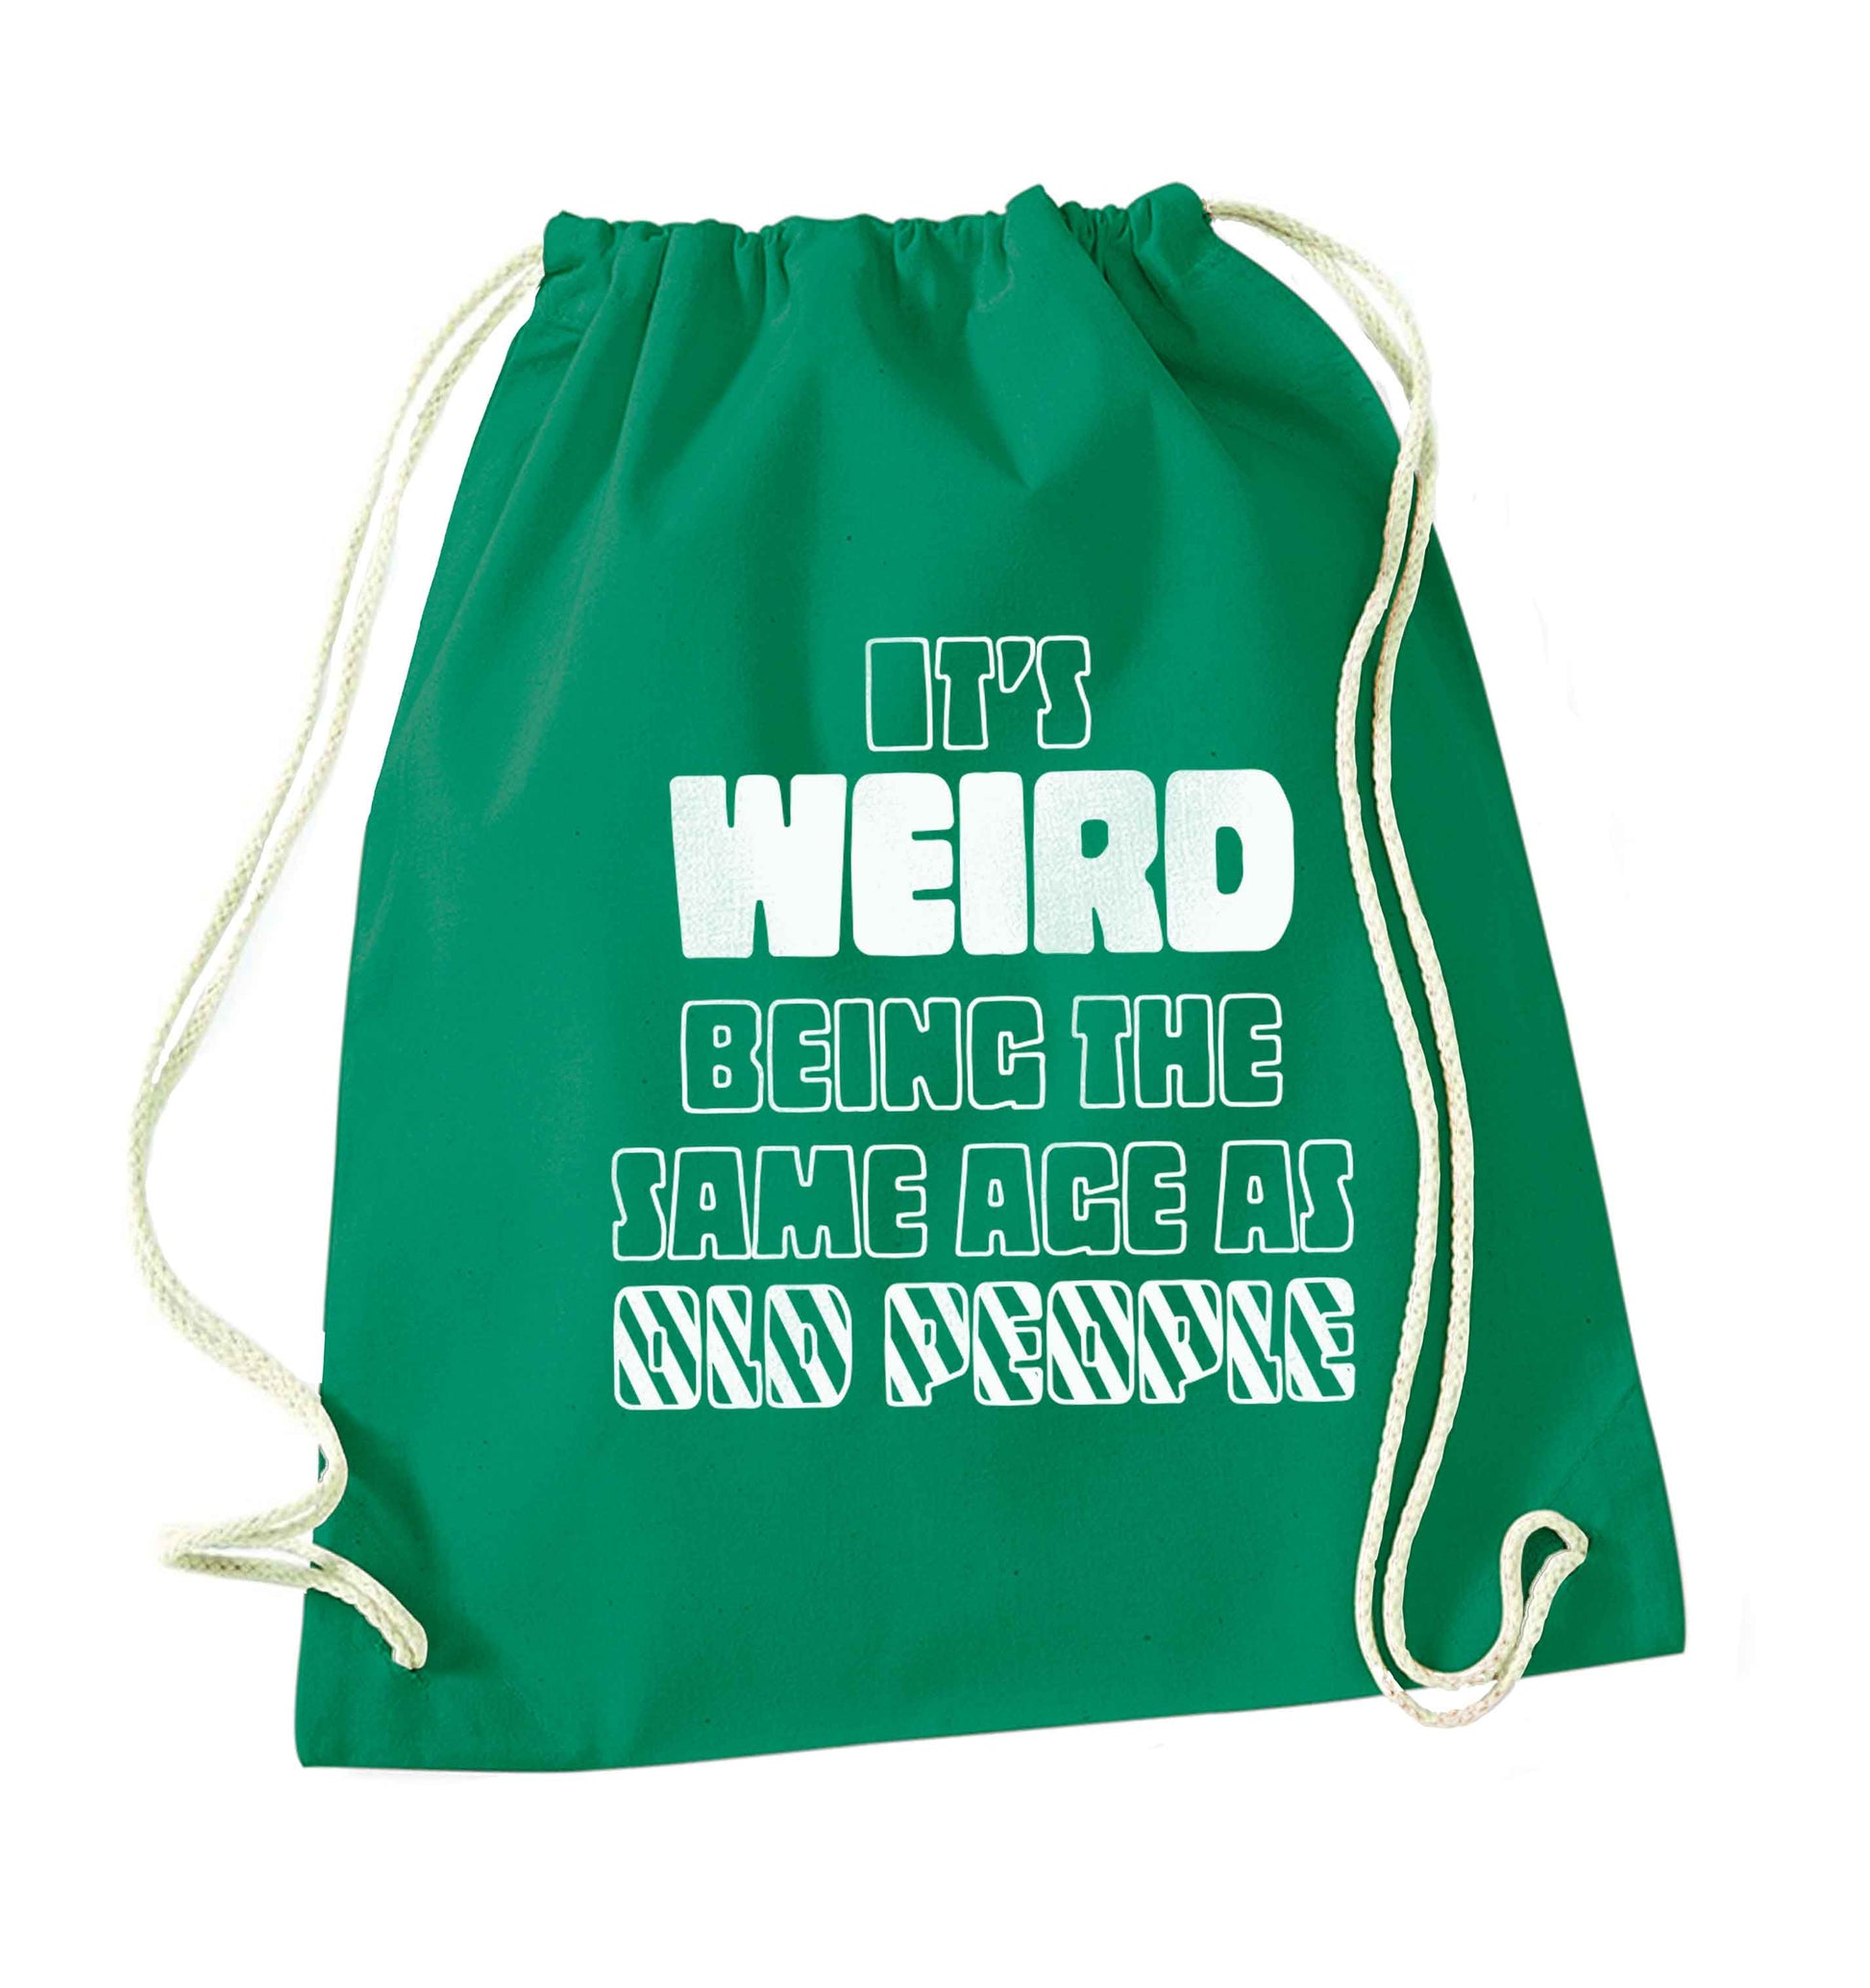 It's weird being the same age as old people green drawstring bag